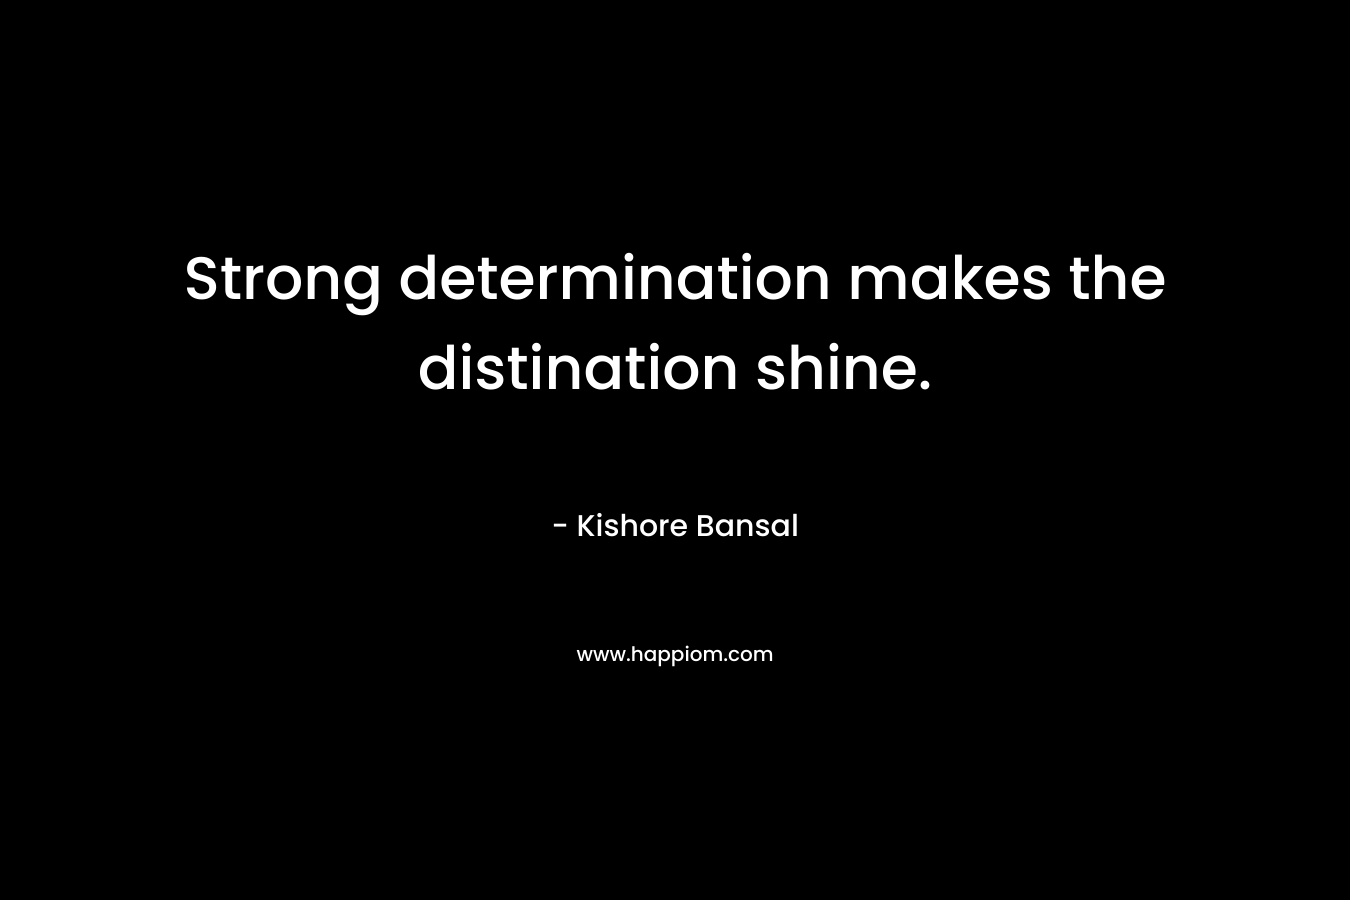 Strong determination makes the distination shine.